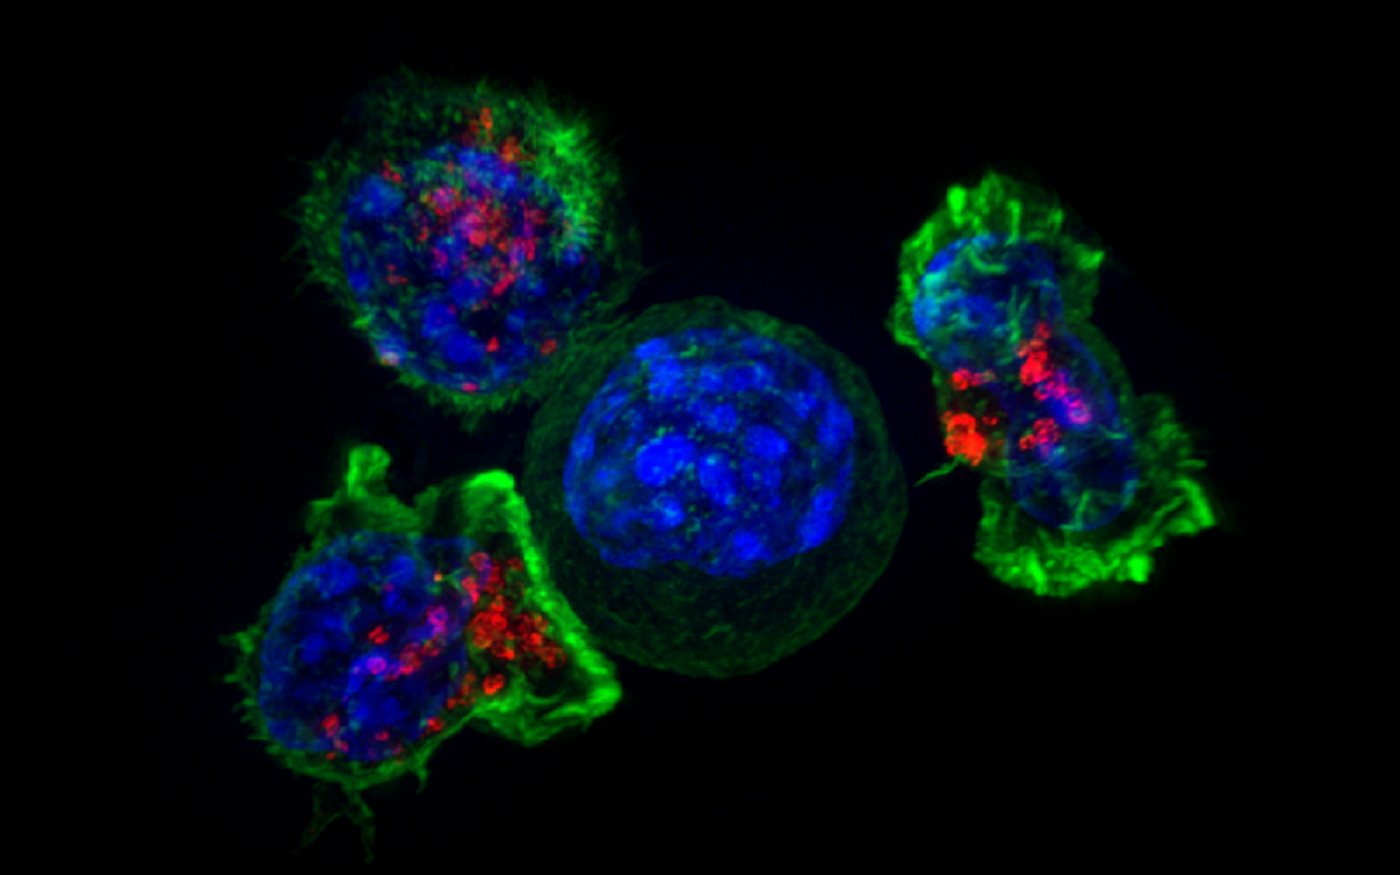 A group of killer T cells (green and red) surrounding a cancer cell (blue, center). Killer T cells use special chemicals to kill cancer cells. Credit: National Institutes of Health